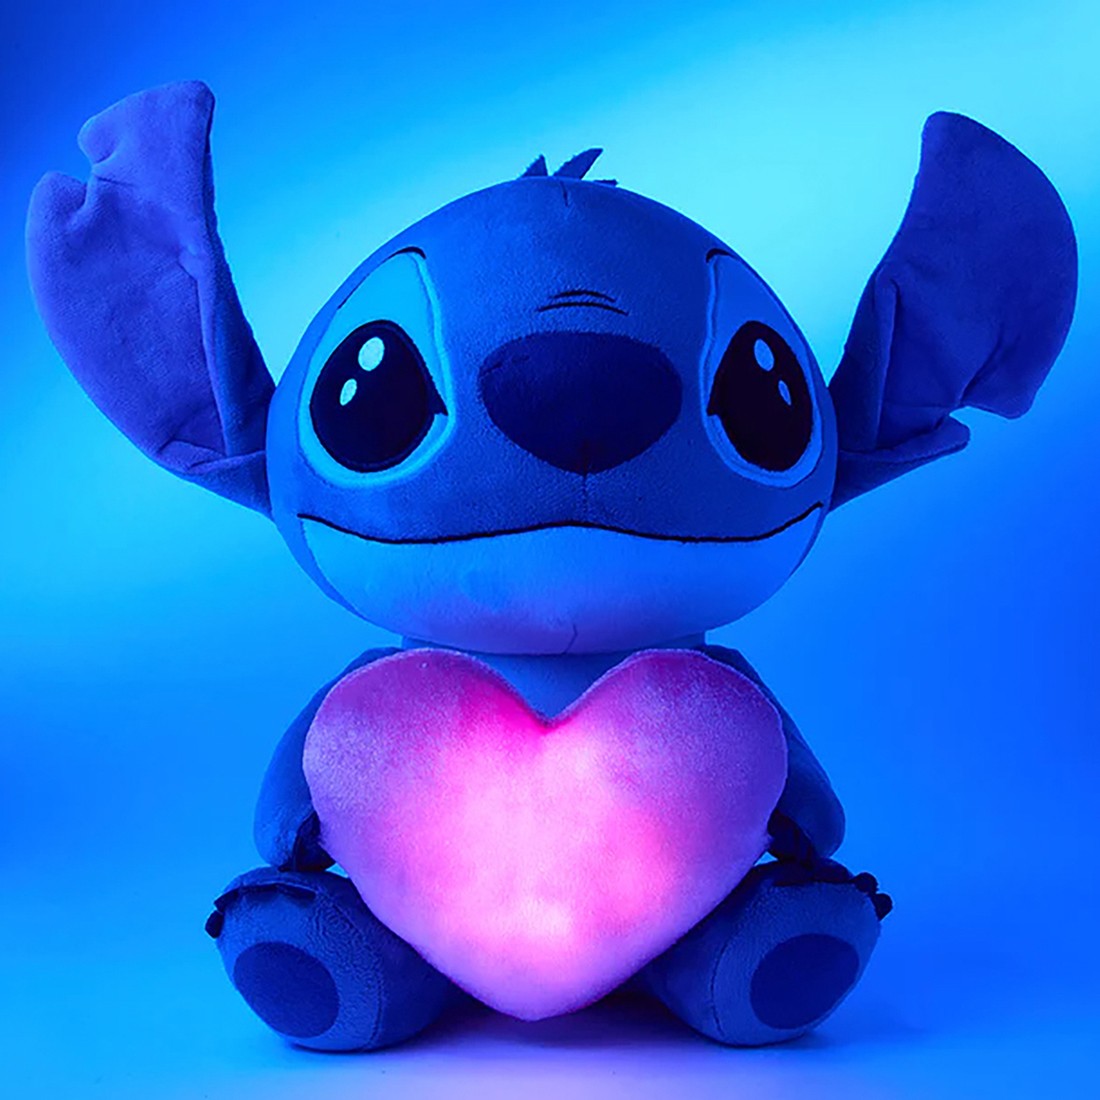 I will love this little blue guy for ever #disney #stitch #stitchconte